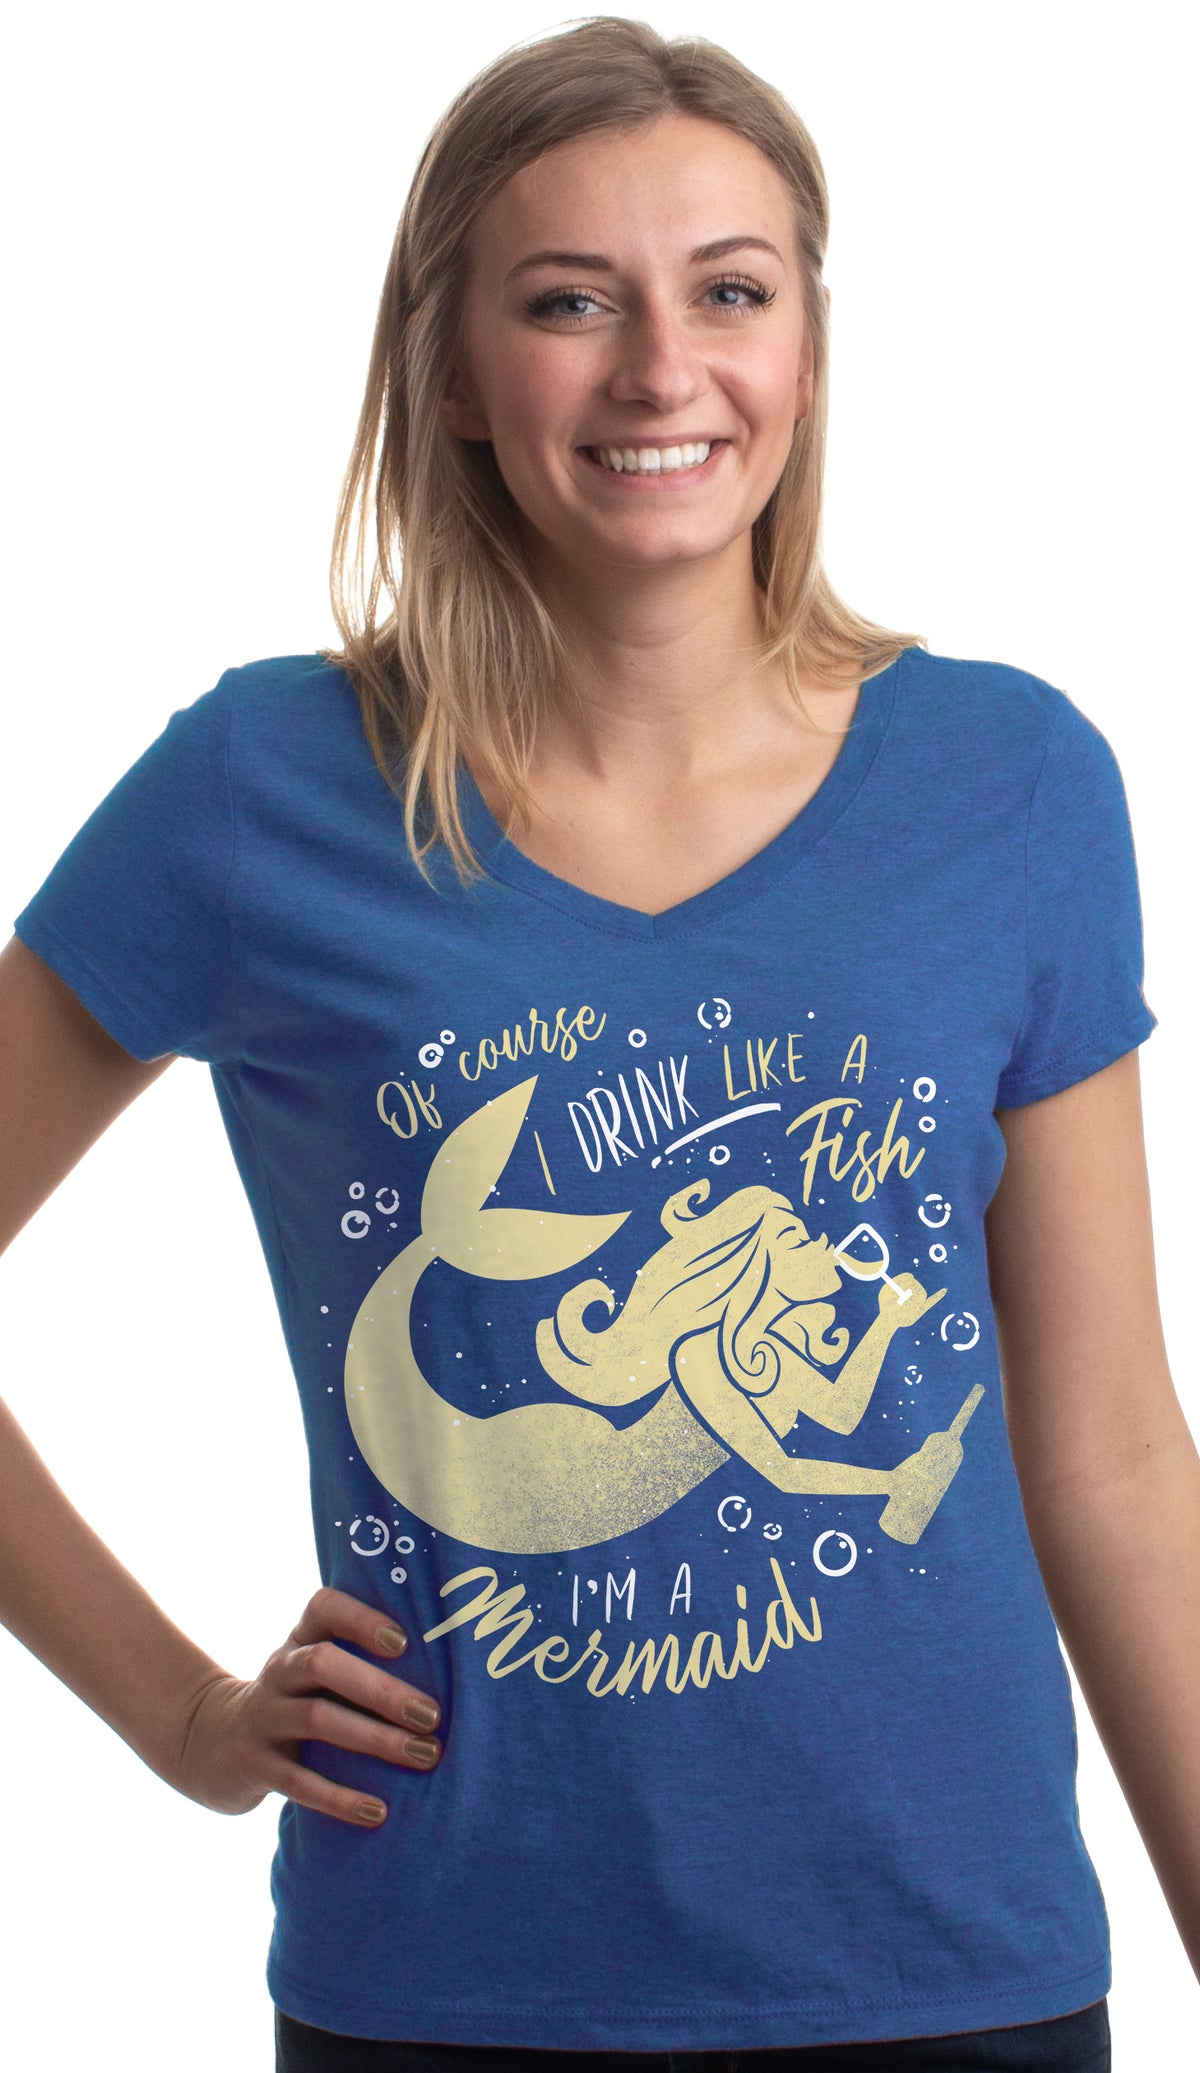 "Of Course I Drink Like a Fish, I'm a Mermaid" | Funny V-neck T-shirt - Women's